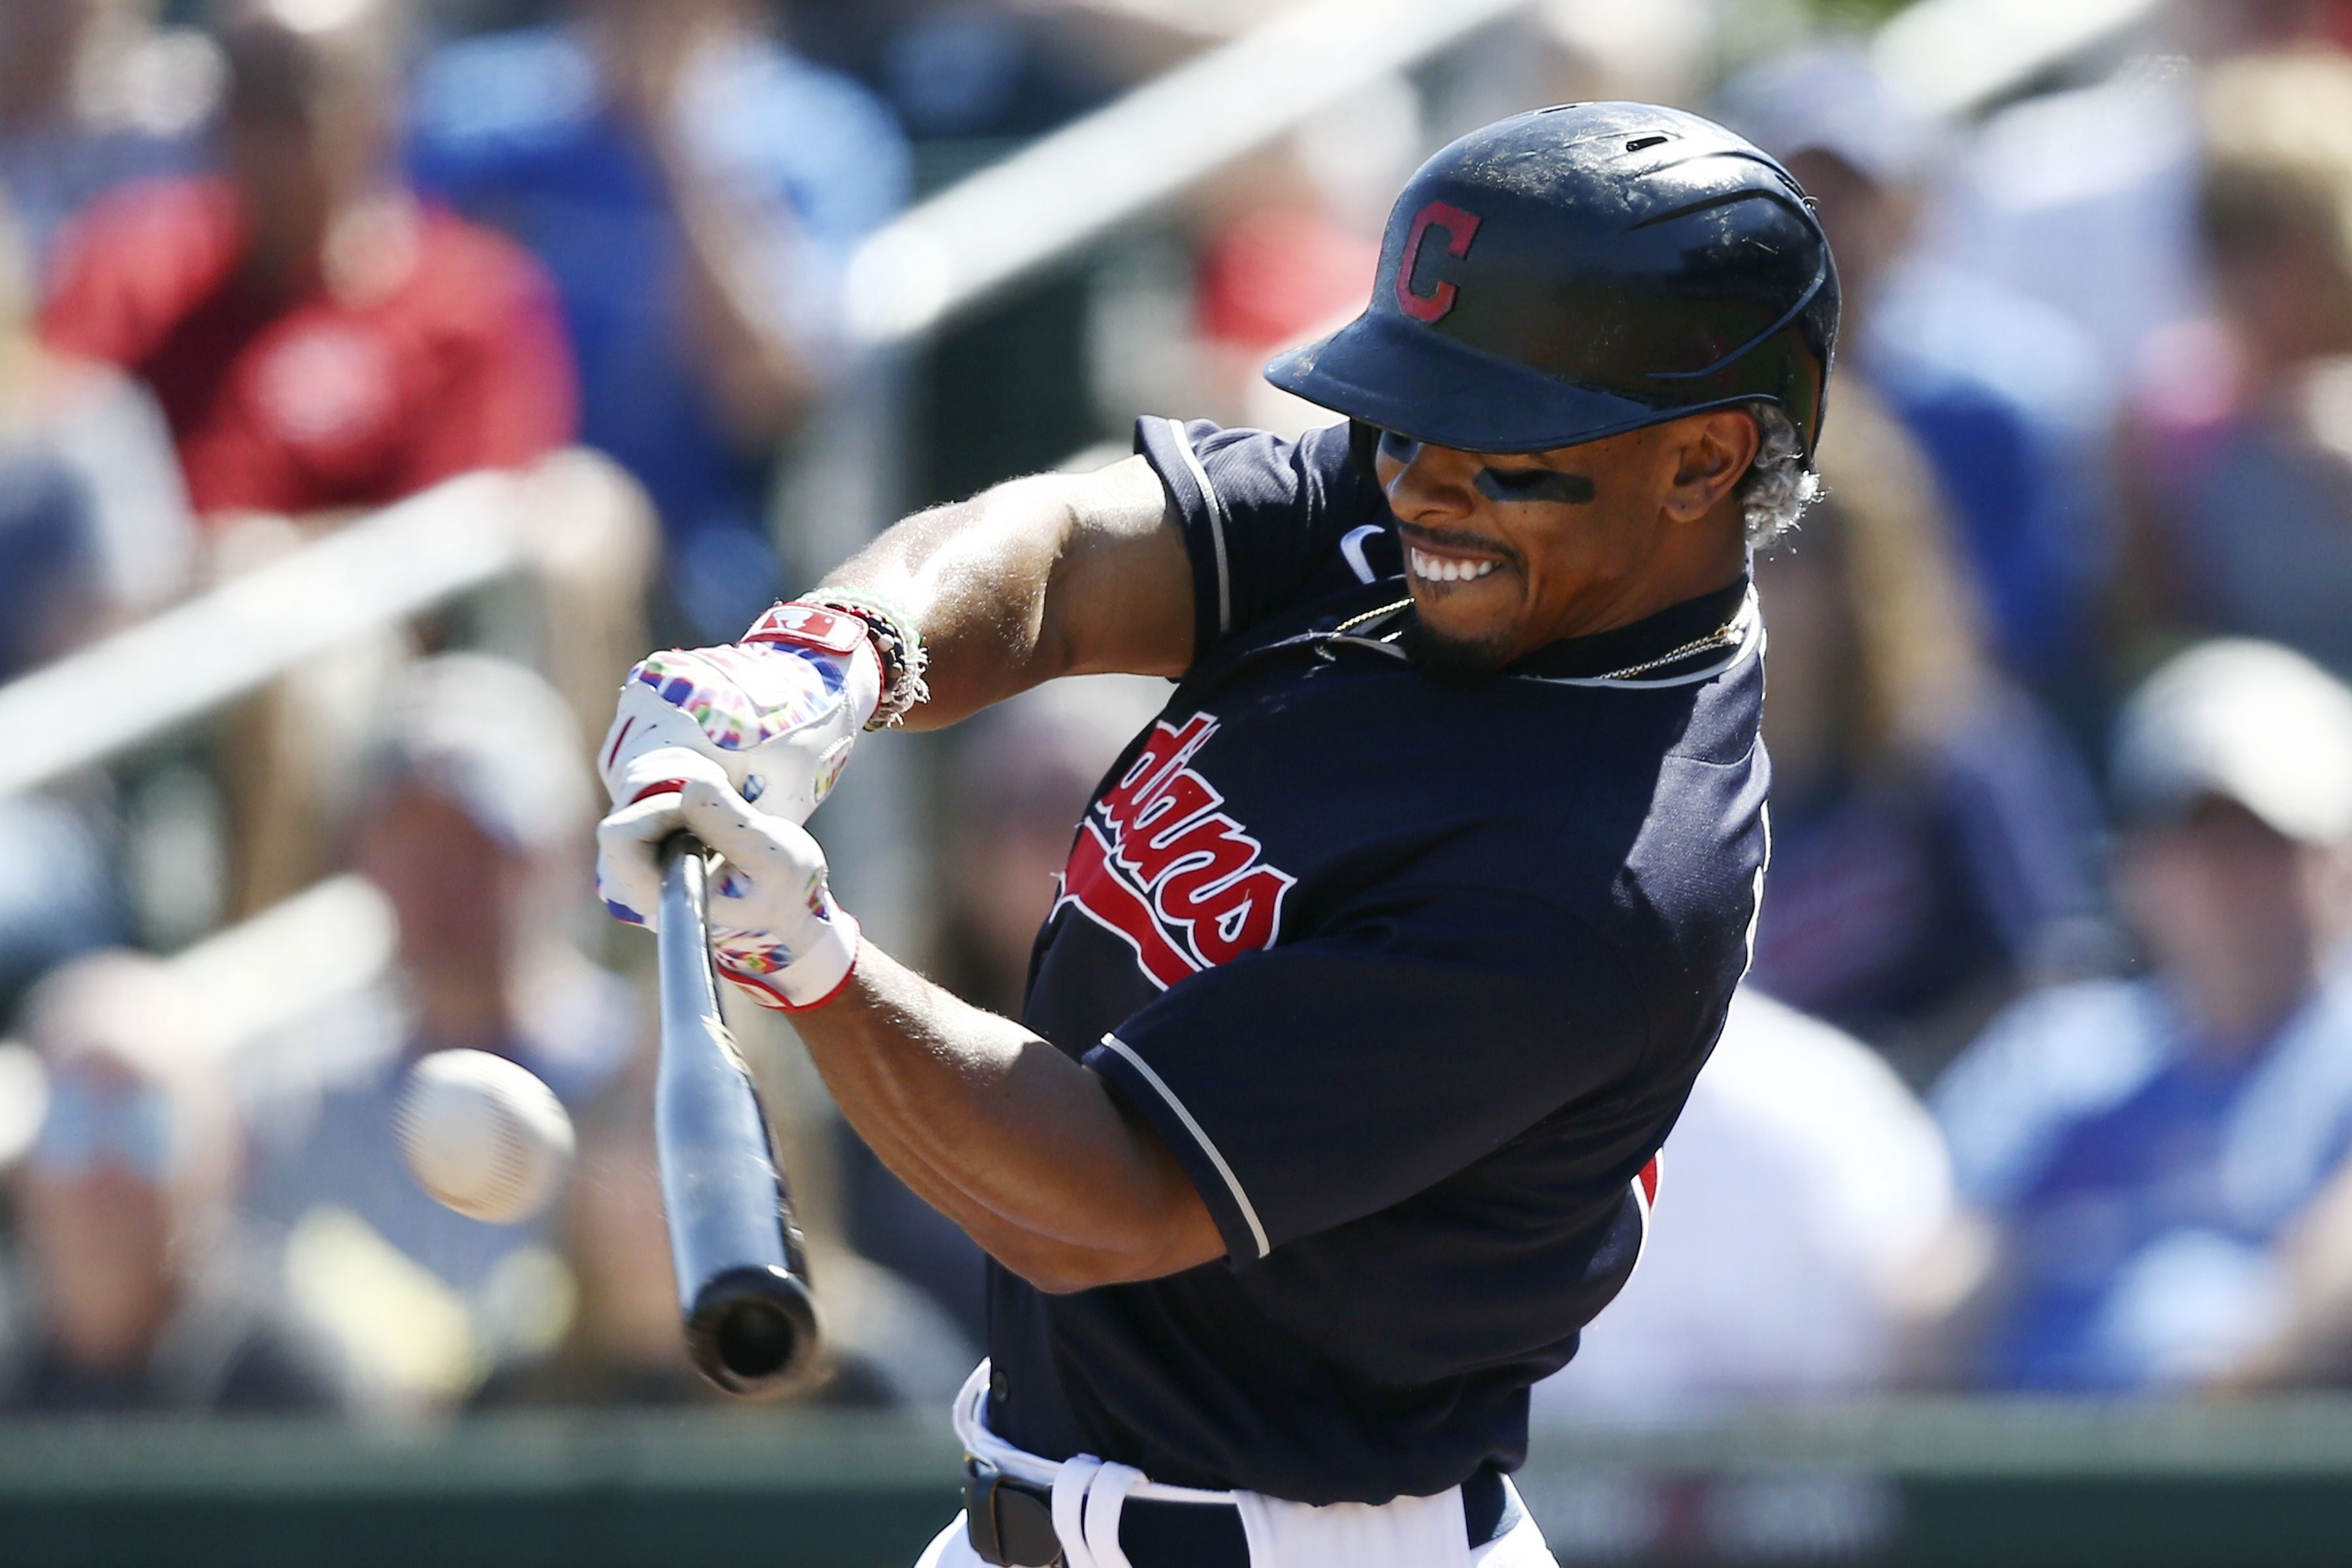 Has paranoia taken hold in Francisco Lindor-Cleveland Indians